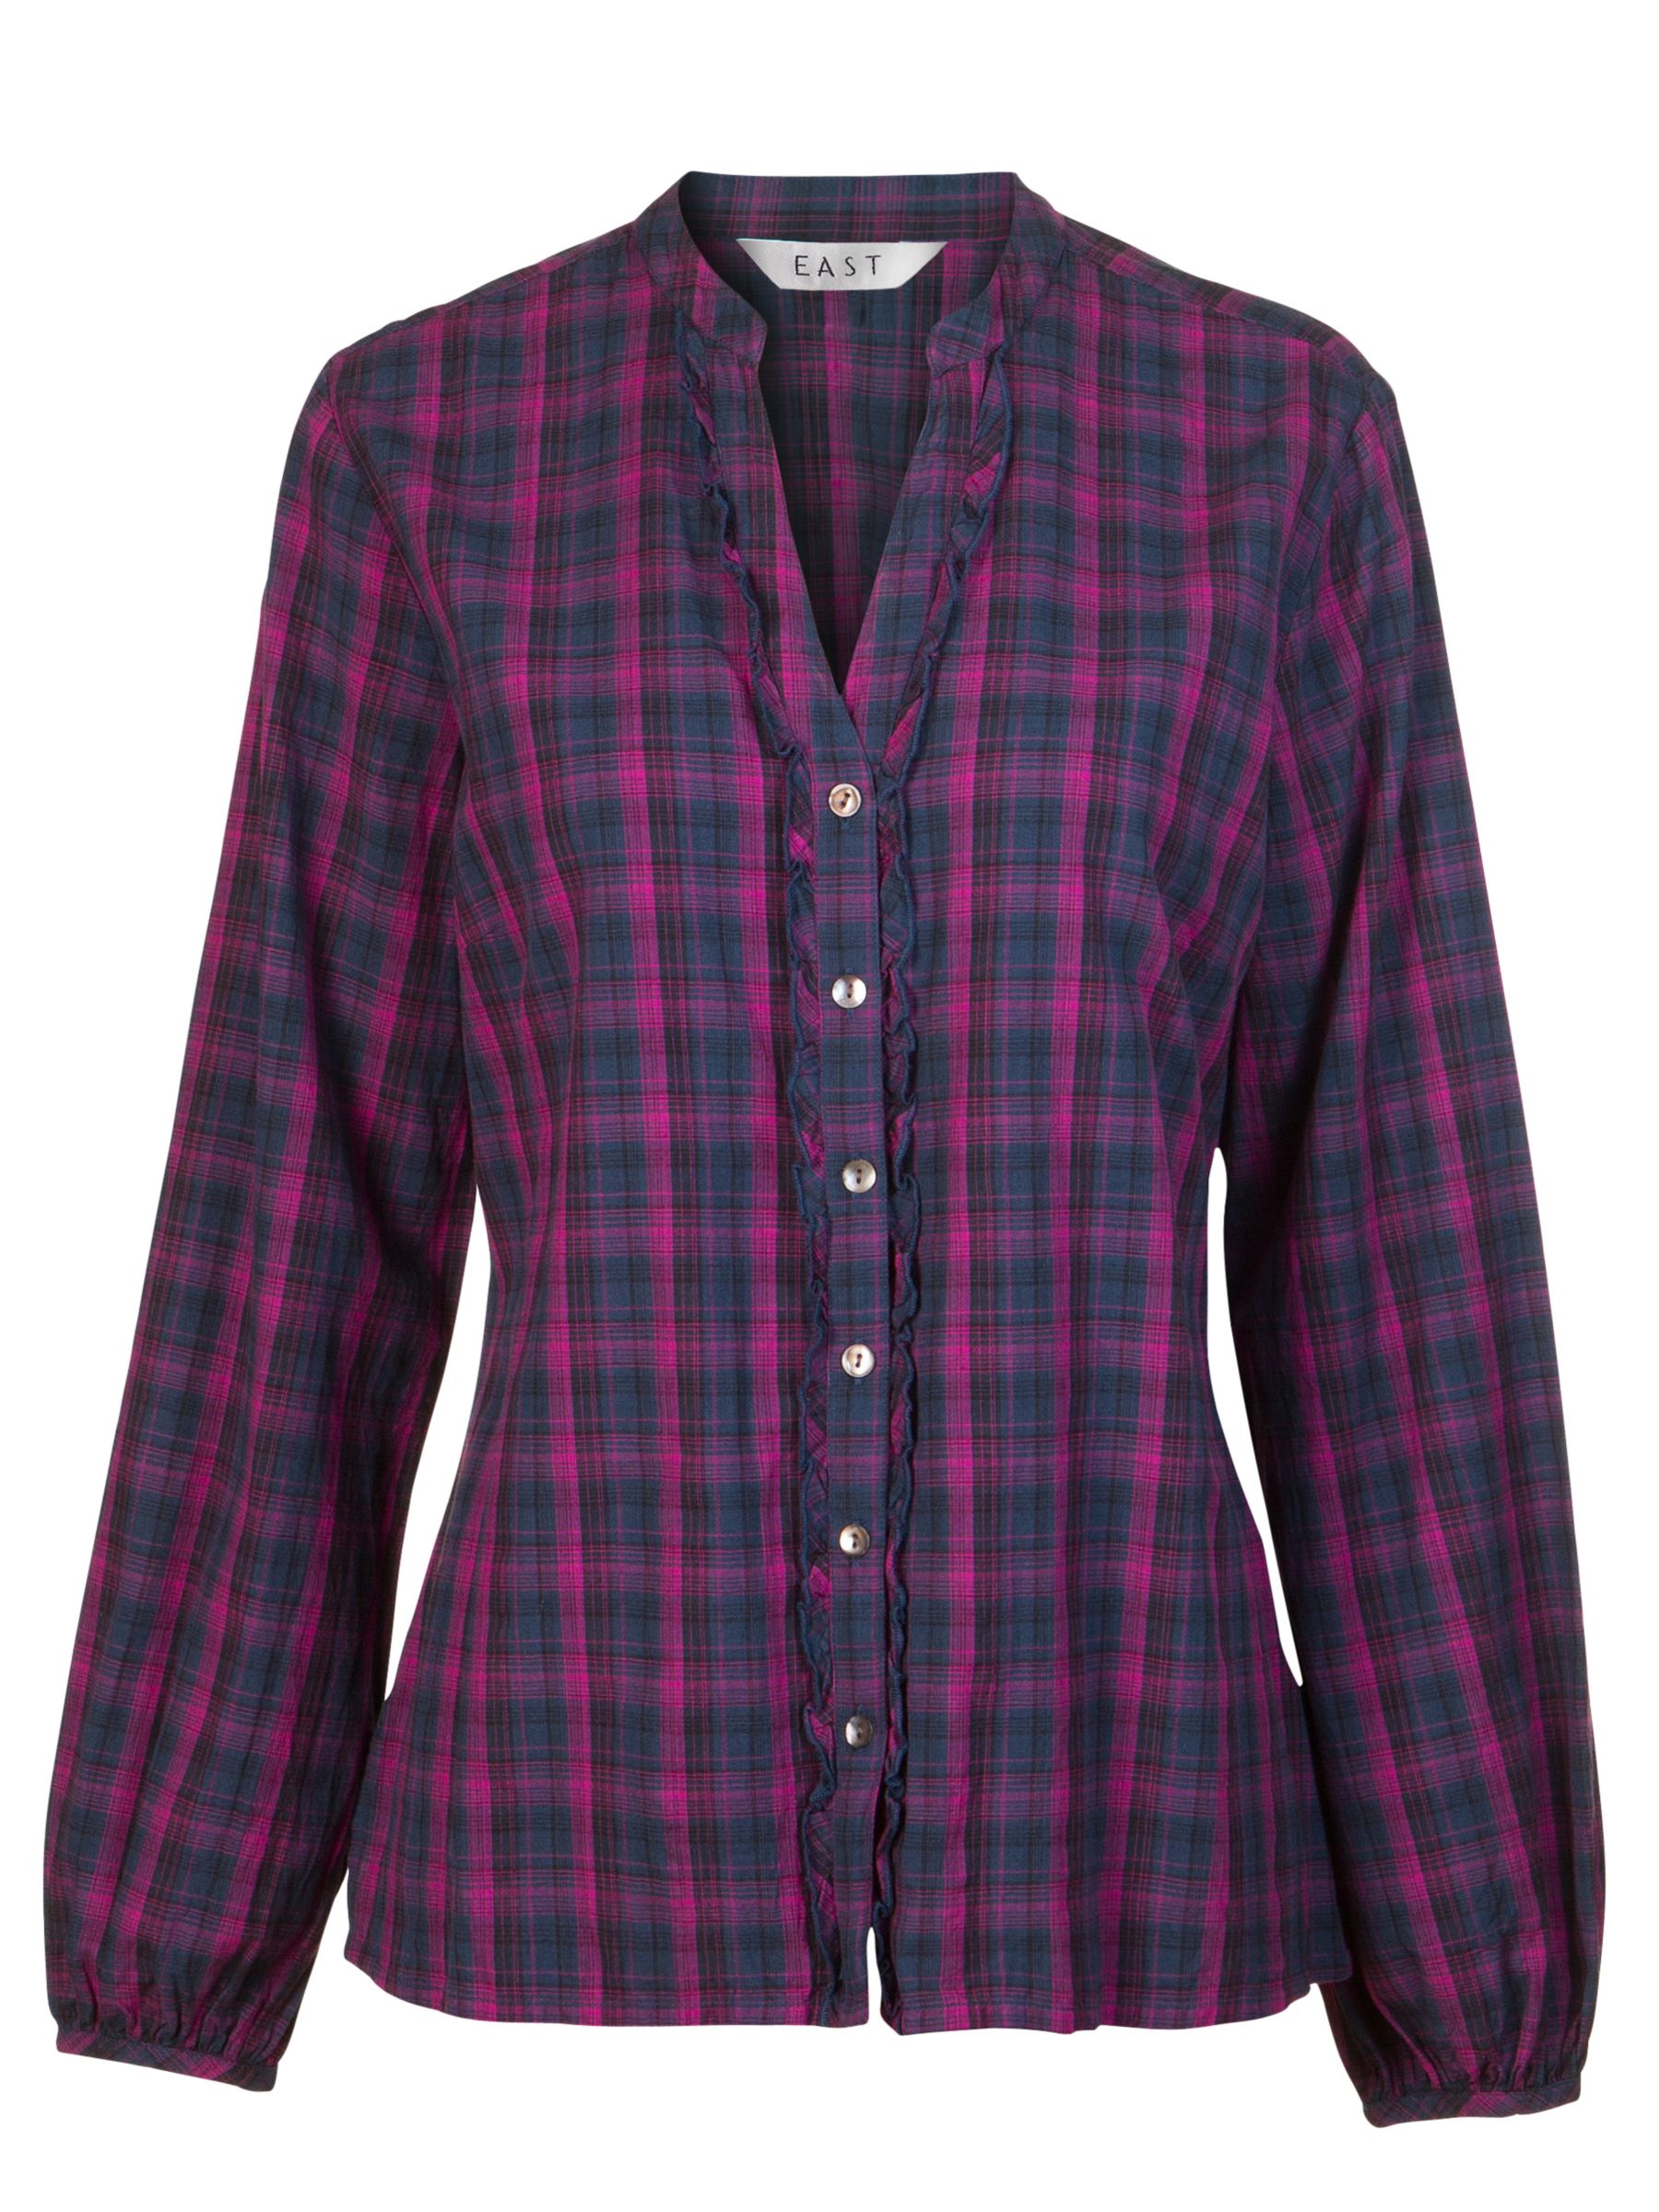 East Belford Check Frill Blouse, Navy